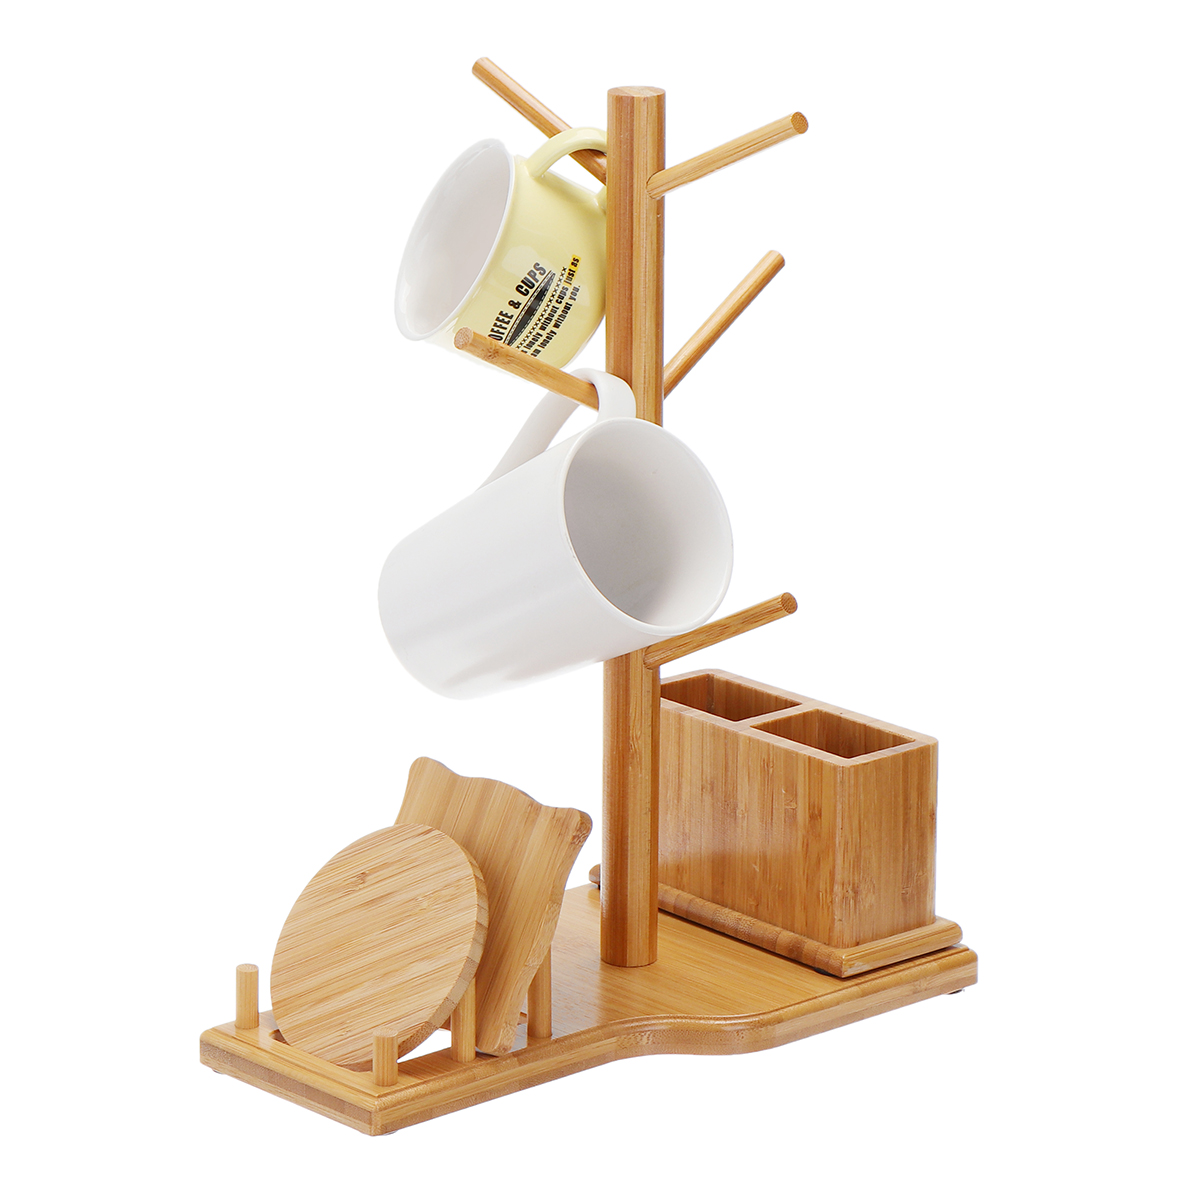 Bamboo-Cup-Mat-Water-Cup-Storage-Rack-Creative-Cup-Organizing-Shelf-Household-Office-Living-Wooden-G-1756070-1